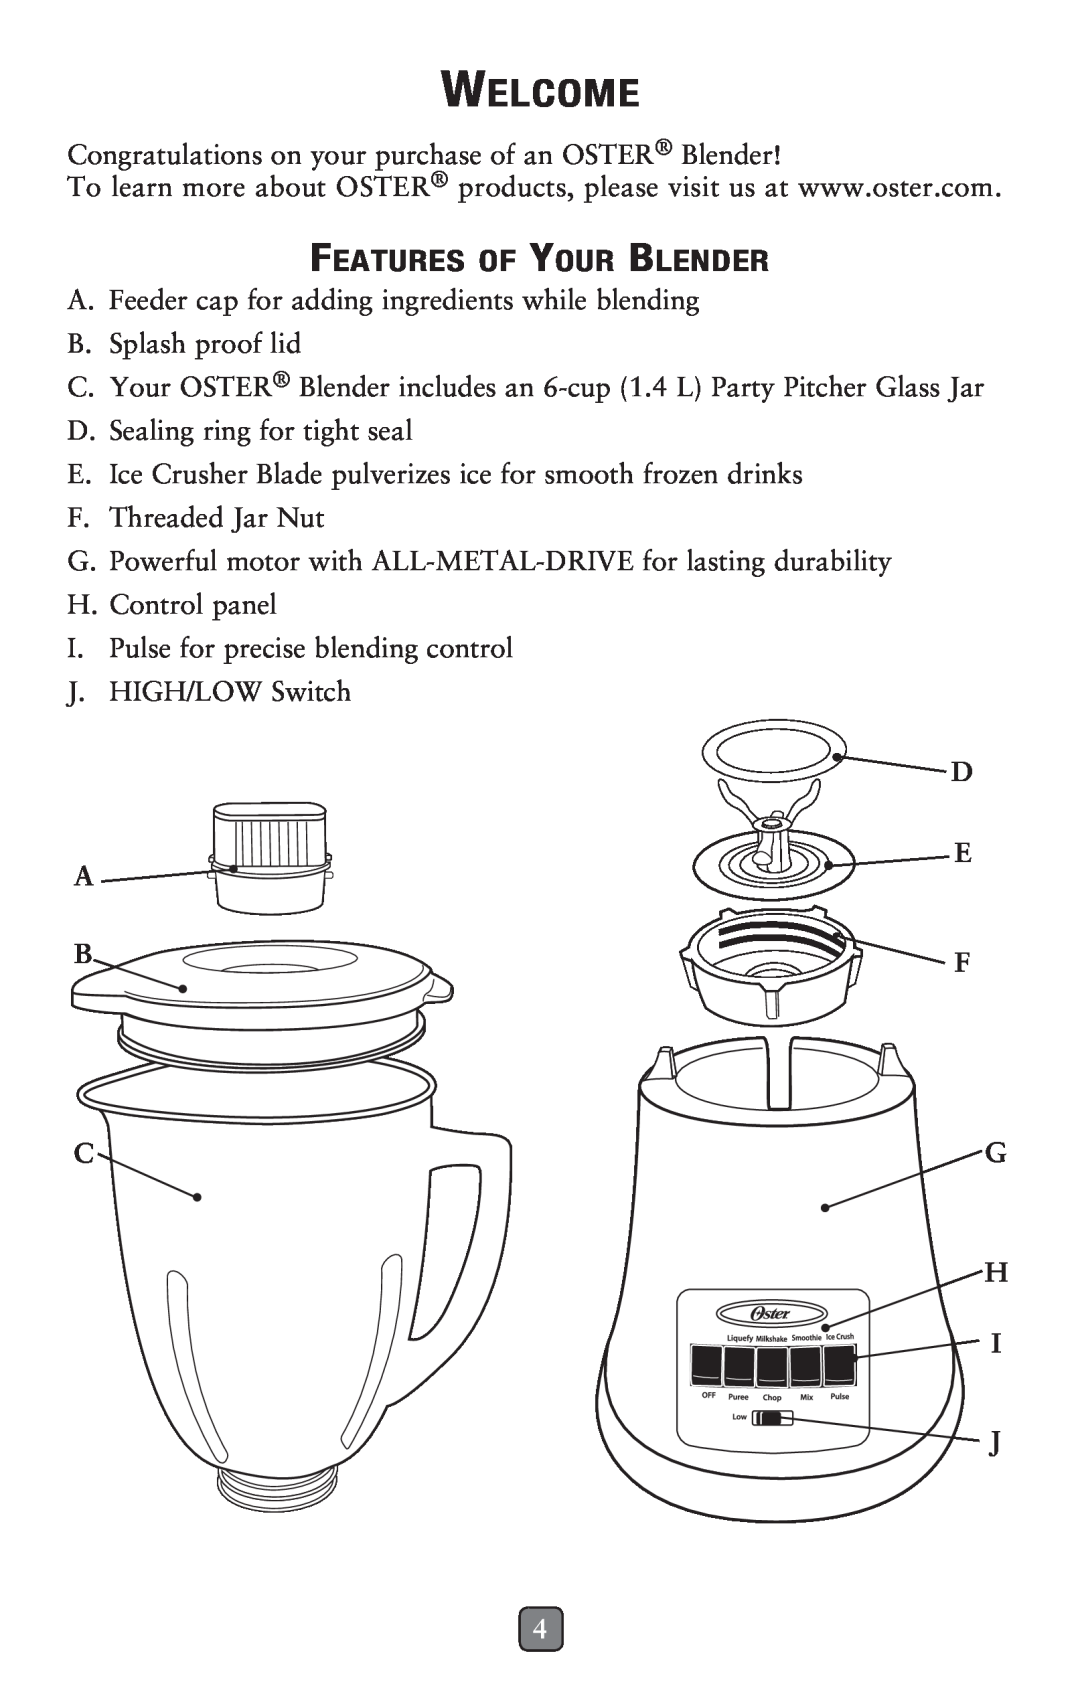 Oster BLSTMG-W, 133093-002 user manual Welcome, Features Of Your Blender, C G H I J 